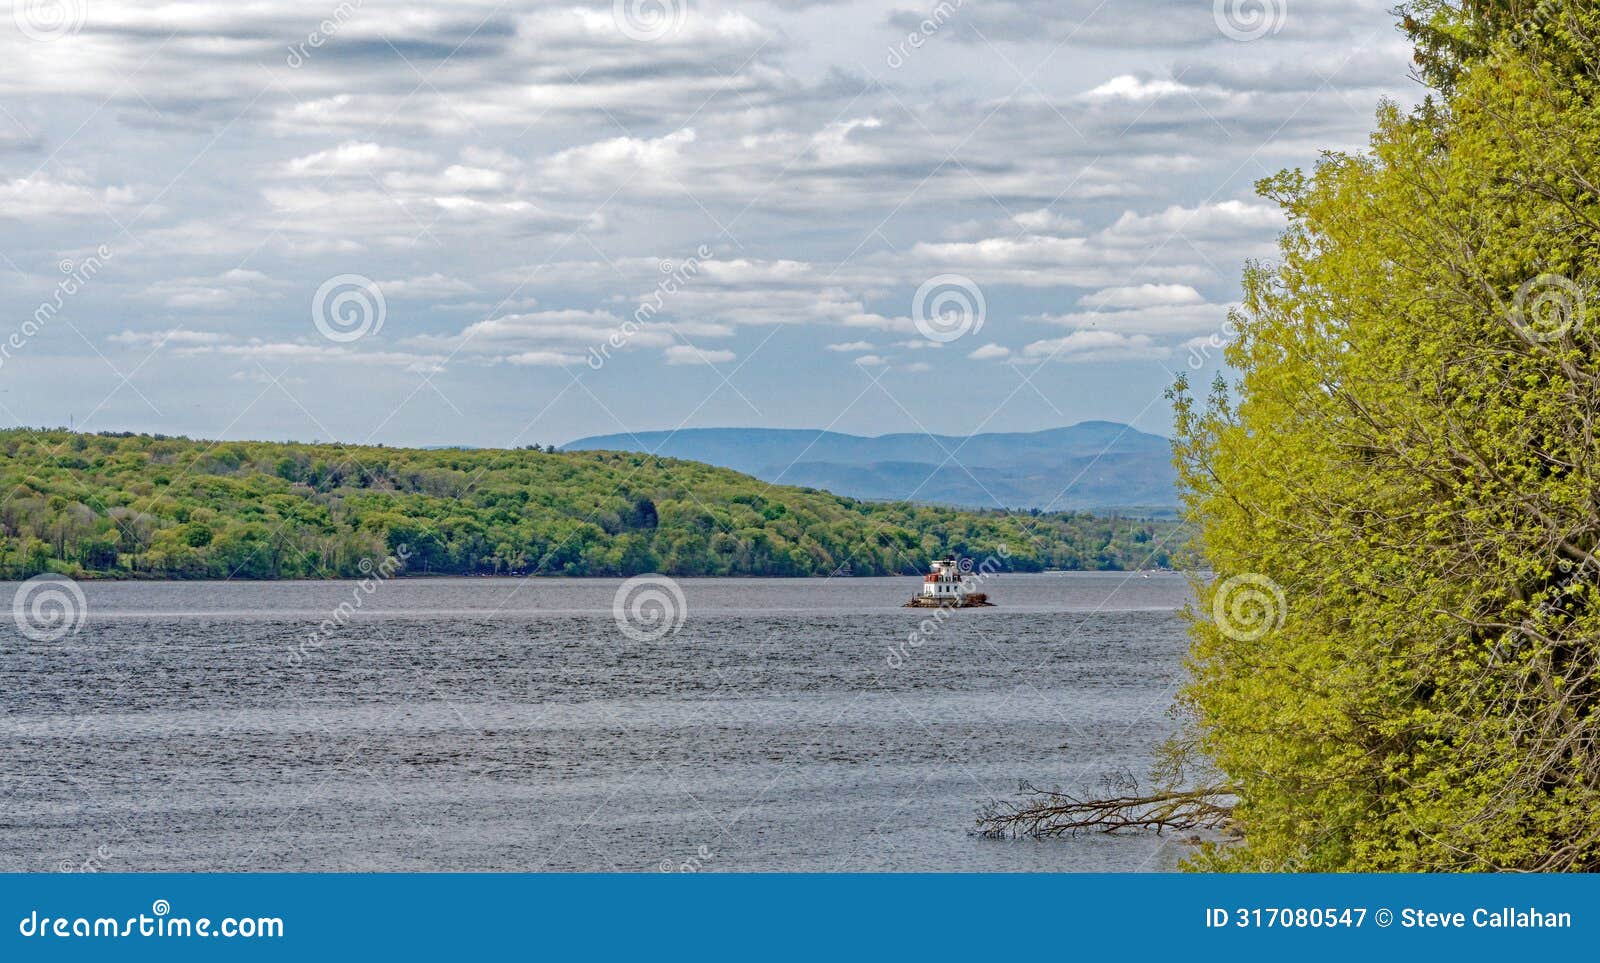 esopus meadows lighthouse on hudson river and catskills in spring